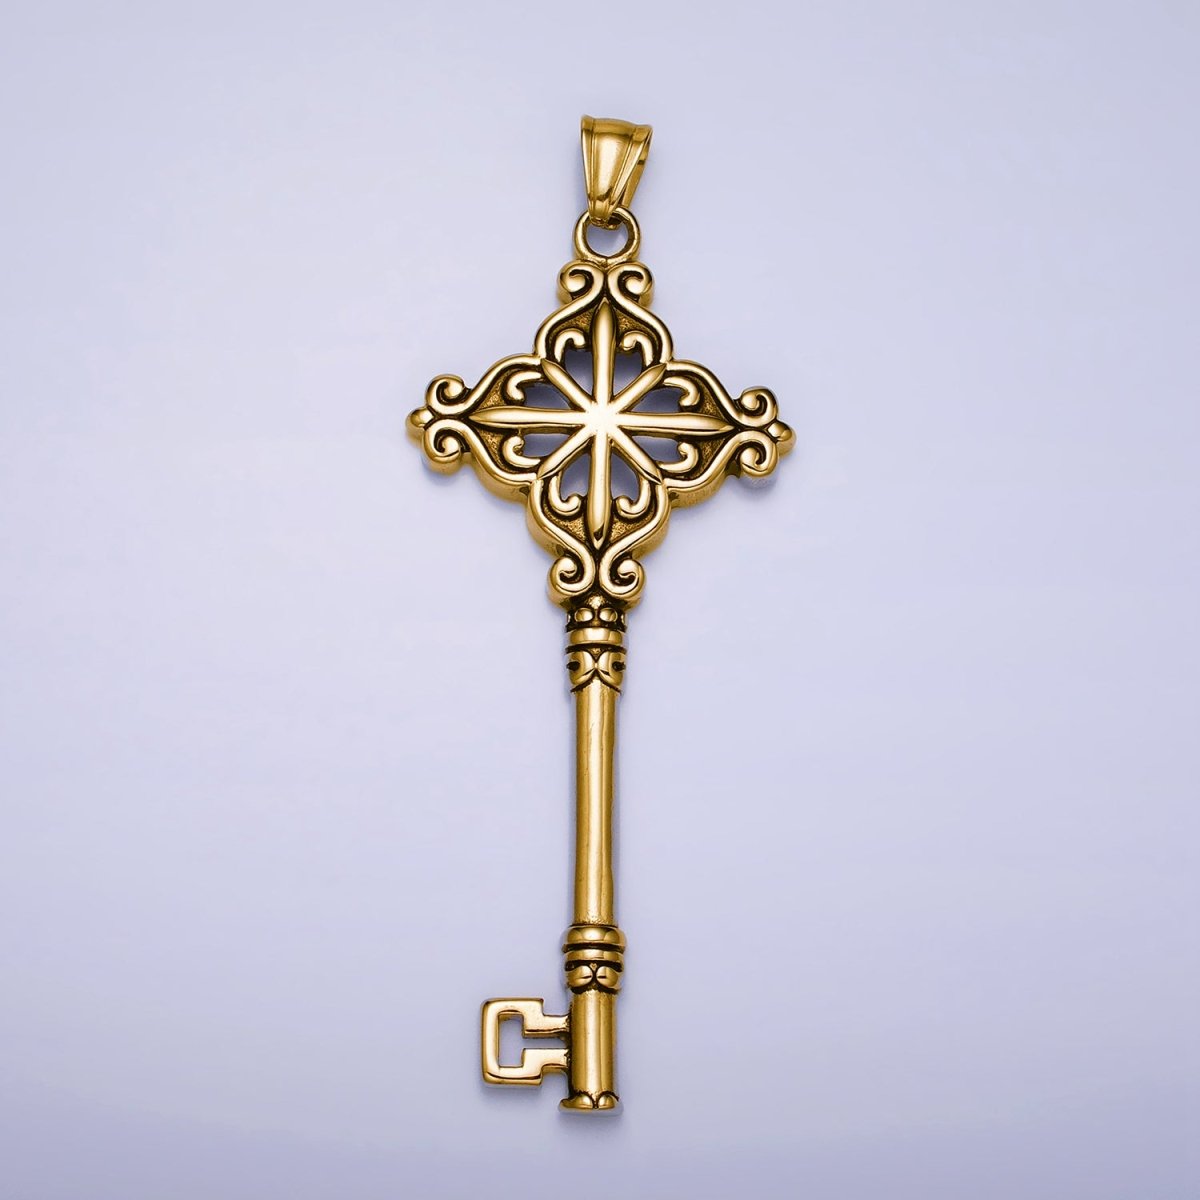 Stainless Steel Celestial North Star Open Lock Key Pendant in Silver & Gold | P-1111 - DLUXCA